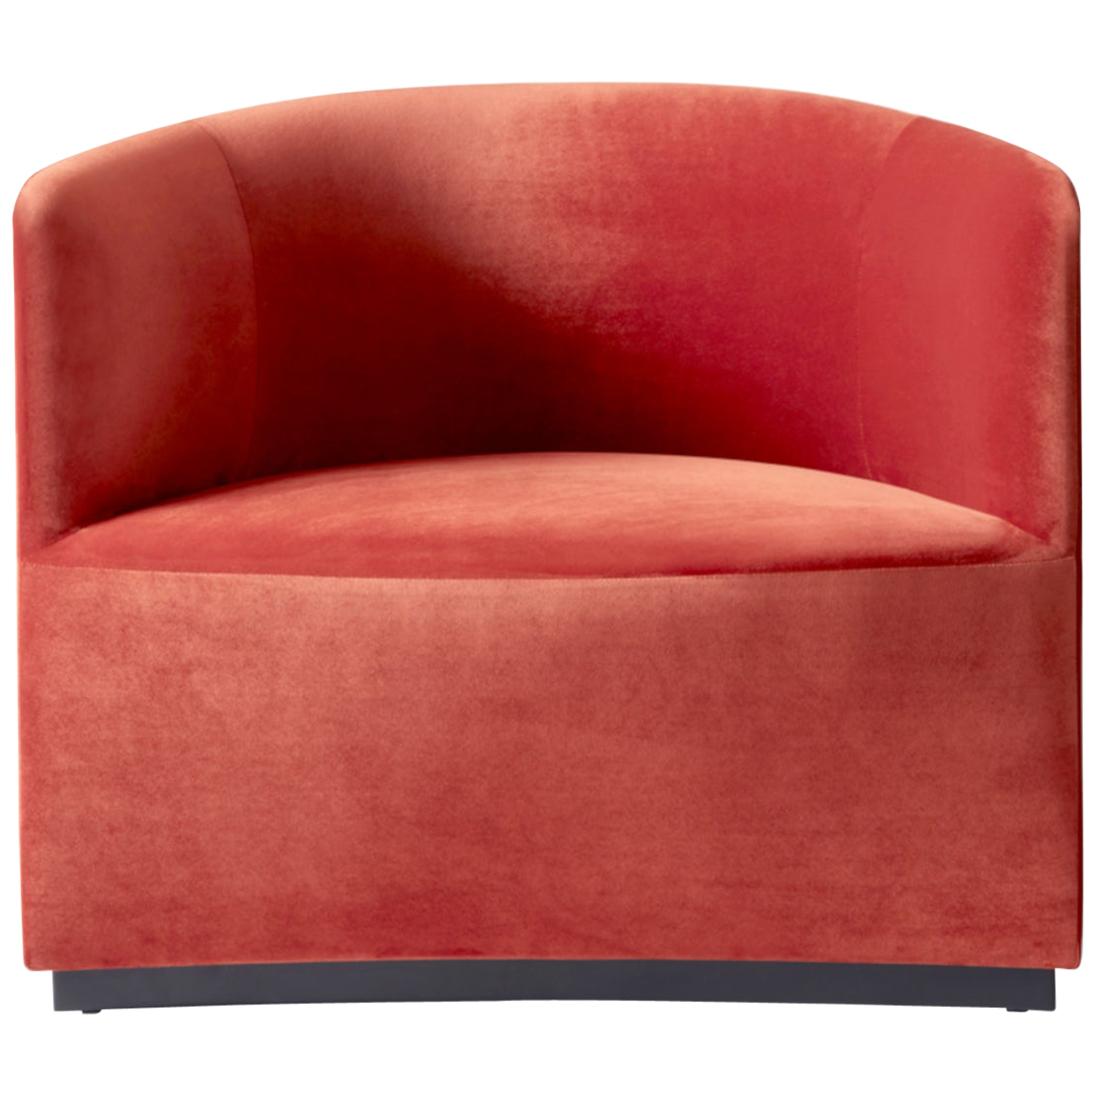 Tearoom Lounge Chair, City Velvet, CA7832/062 'Red' Red 1-Seat Sofa Chair For Sale